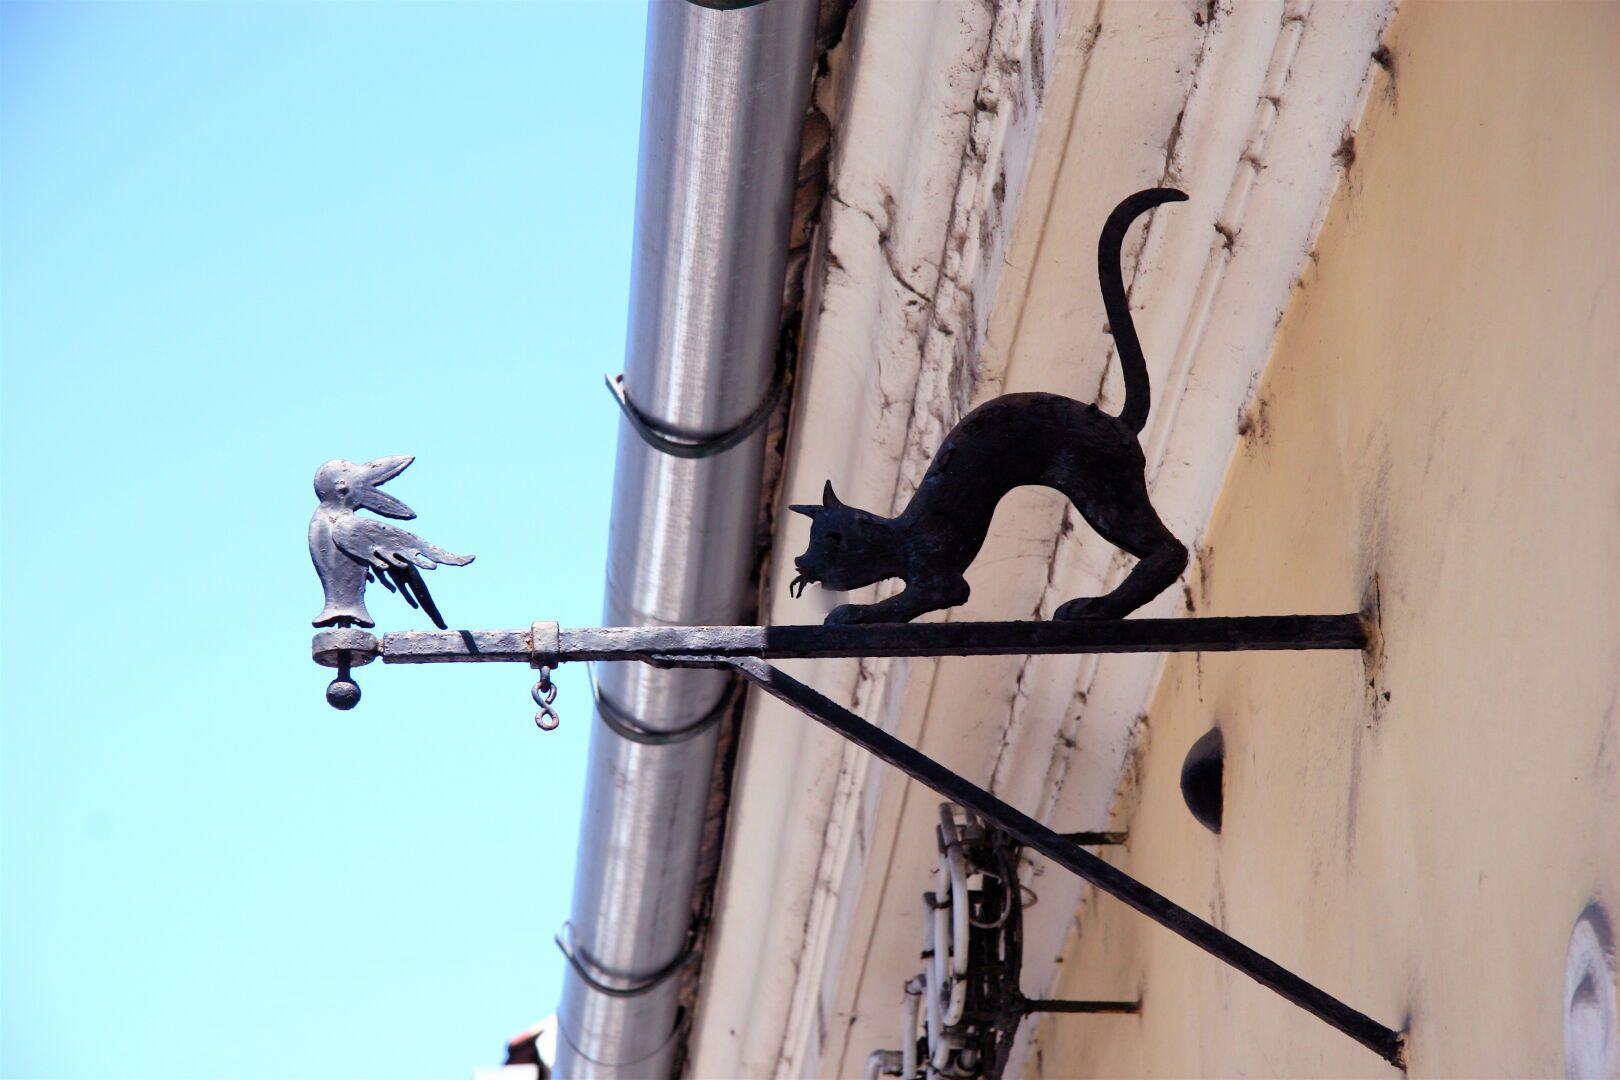 Cast iron sign support on a wall, with a silver-painted bird at the end and the silhouette of a black-painted cat about to pounce from the shadows.